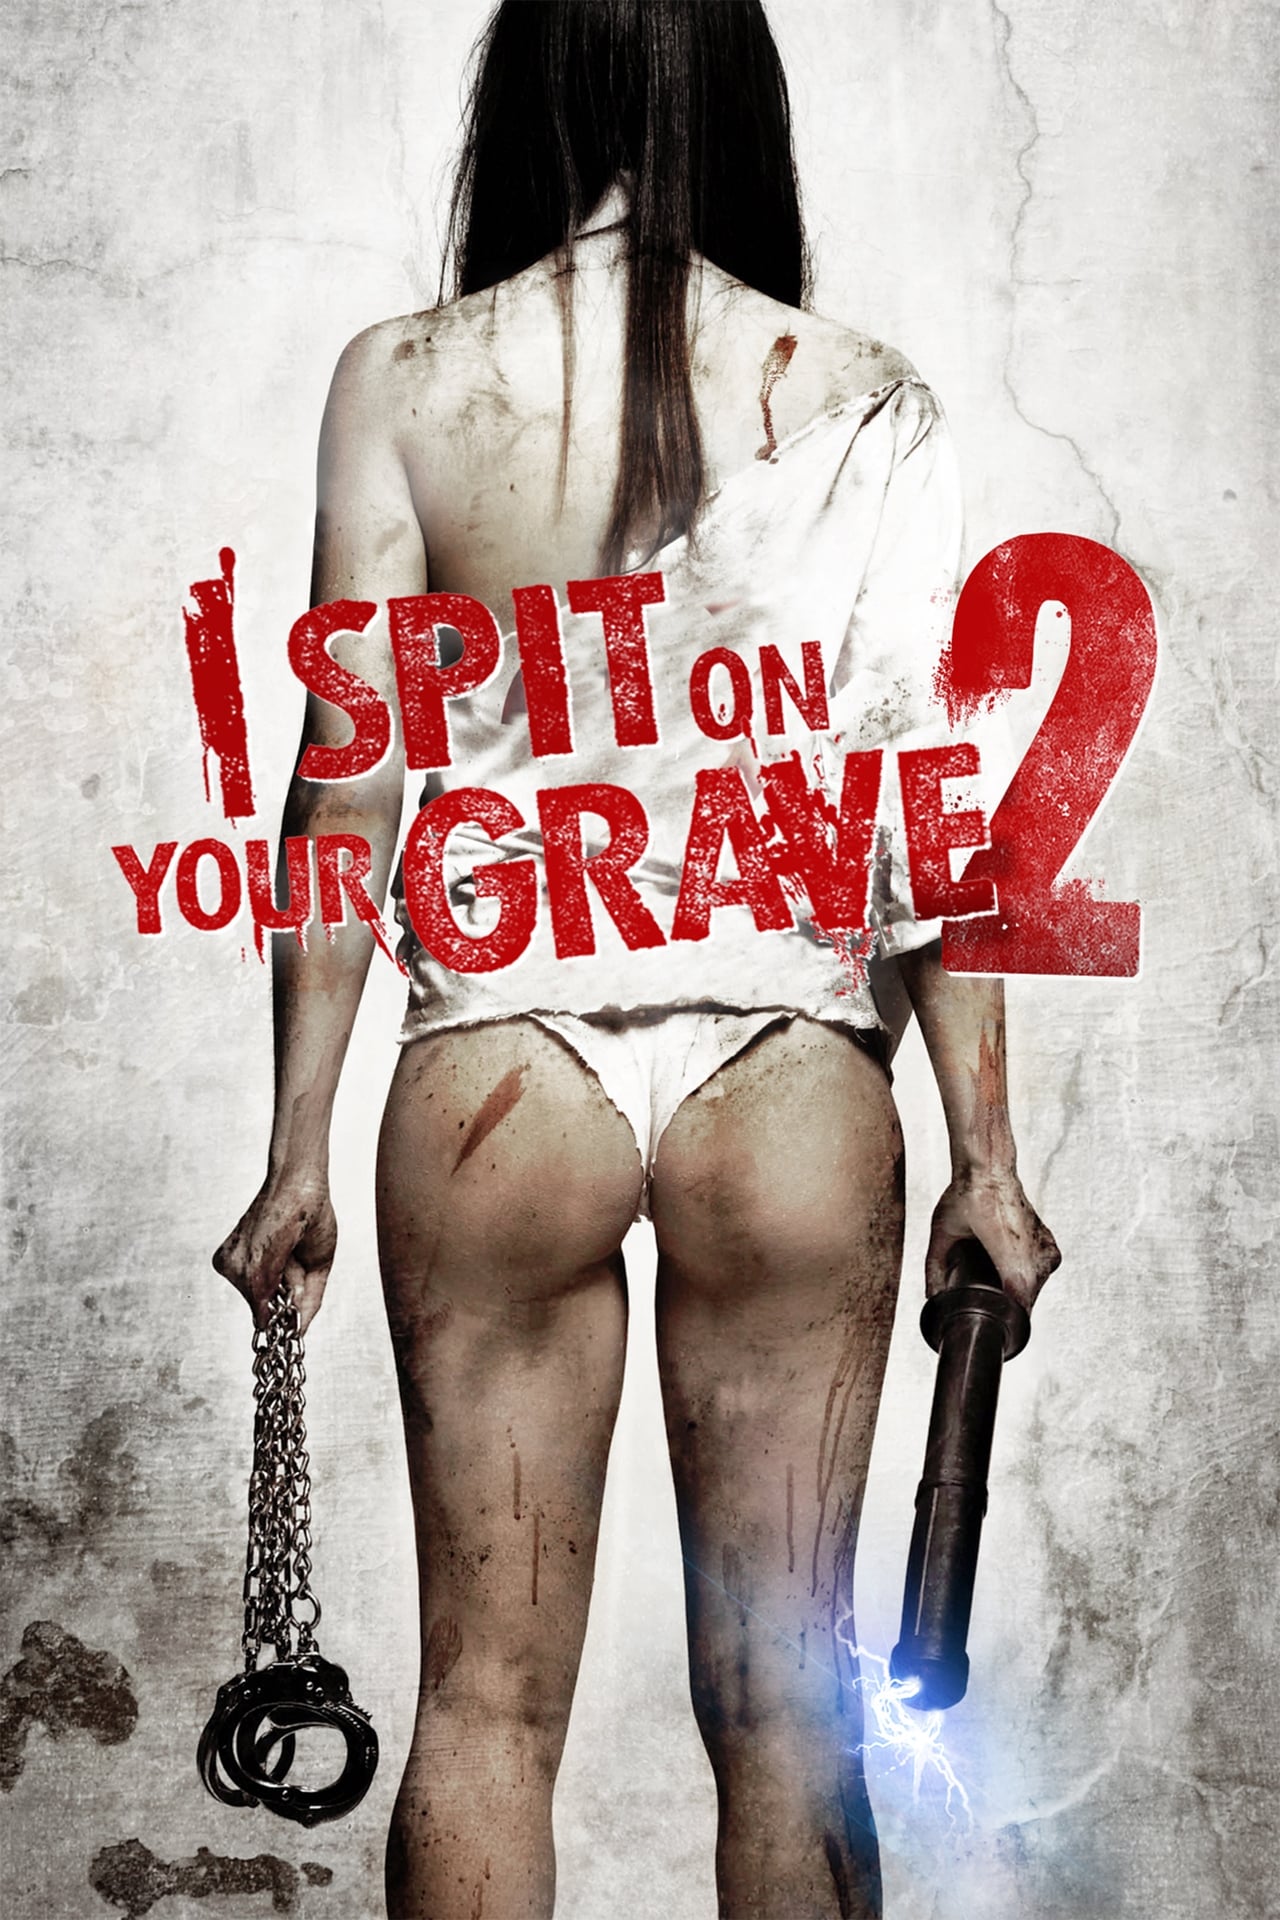 I Spit on Your Grave 2 (2013) 1594Kbps 23.976Fps 48Khz BluRay DTS-HD MA 2.0Ch Turkish Audio TAC